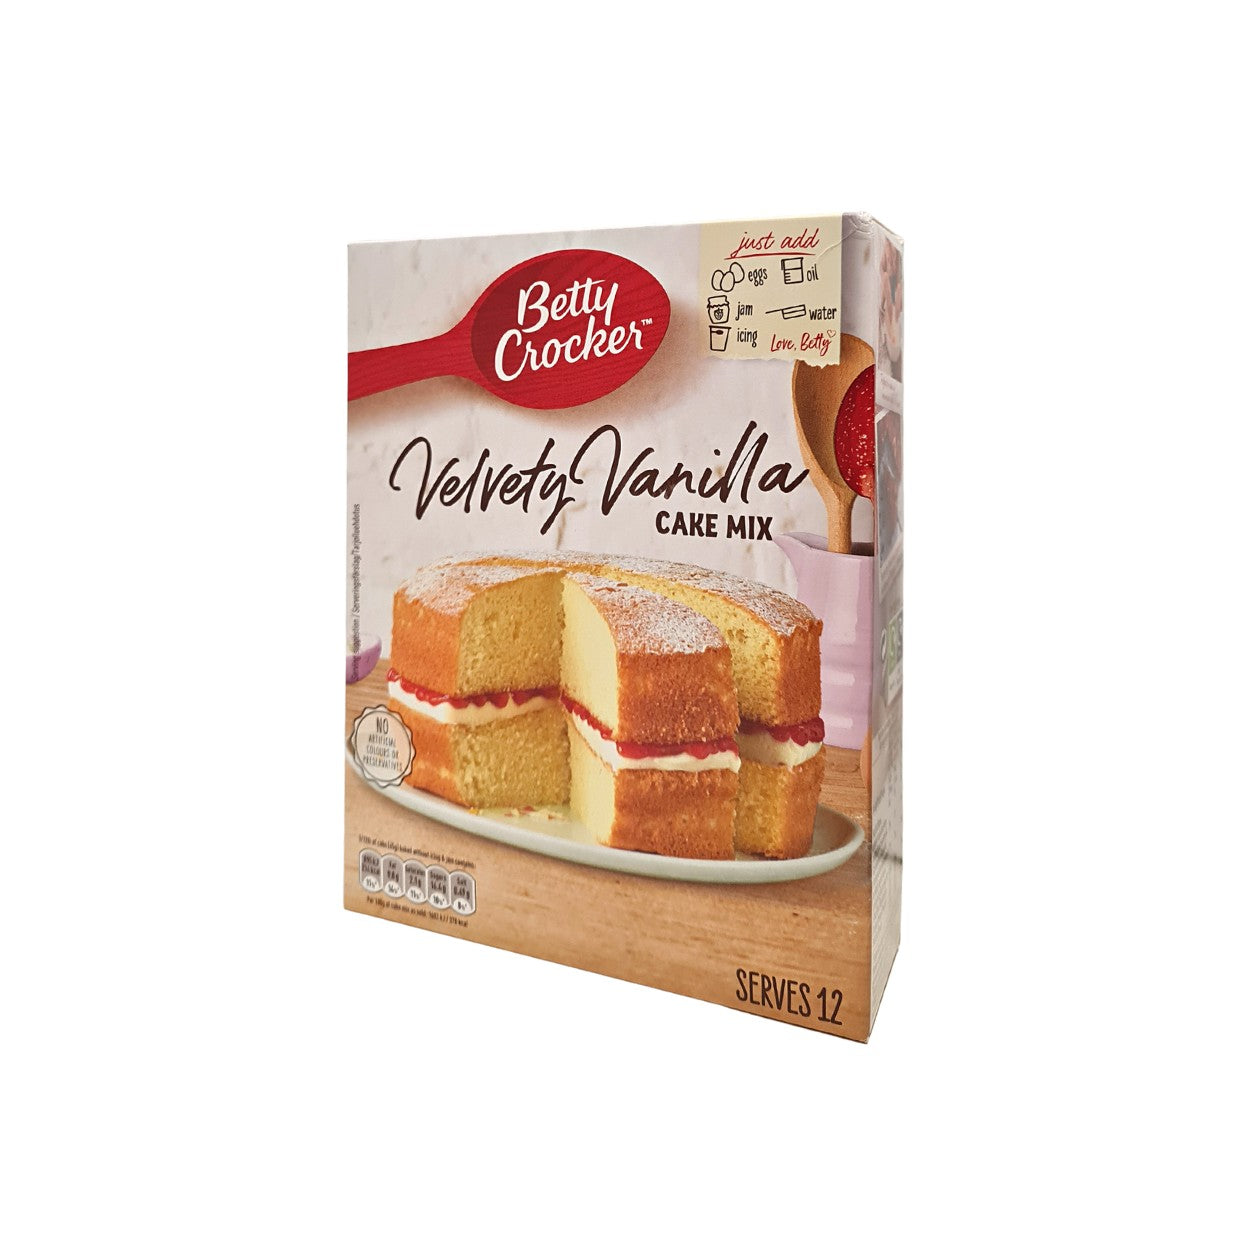 Holleys Fine Foods | FREE AND EASY Sponge Cake Mix 350g